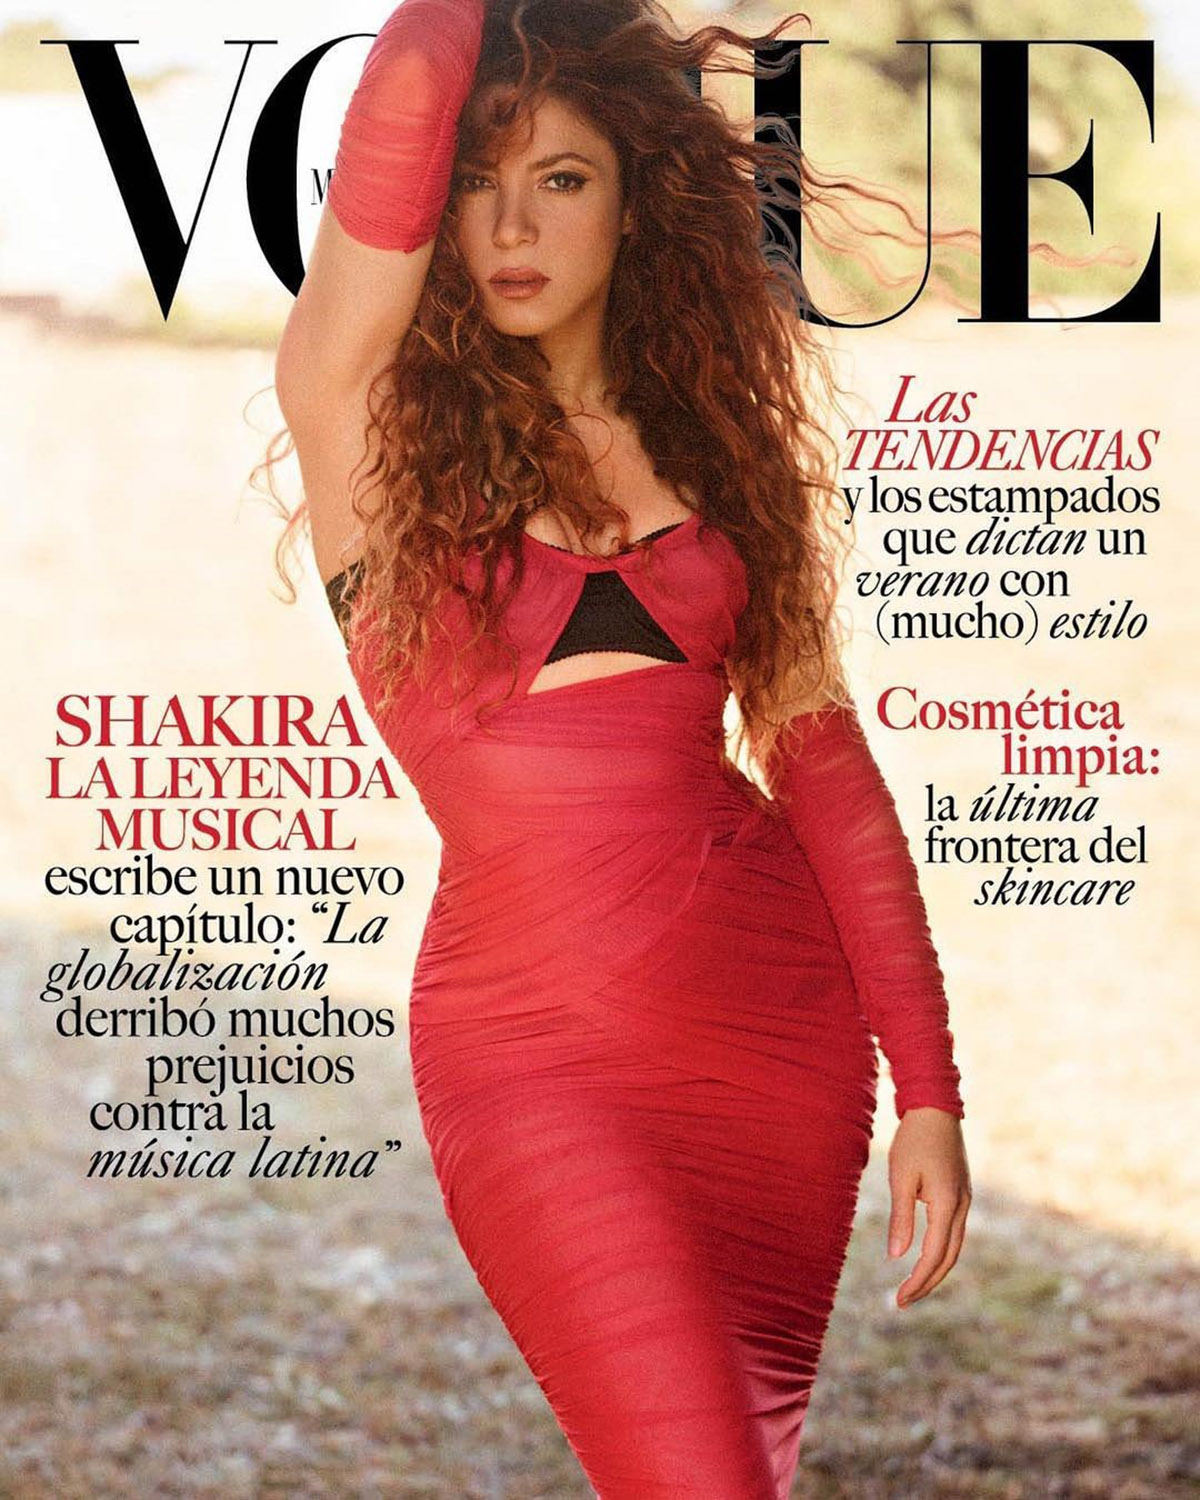 Shakira covers Vogue Mexico & Latin America July 2021 by Nico Bustos